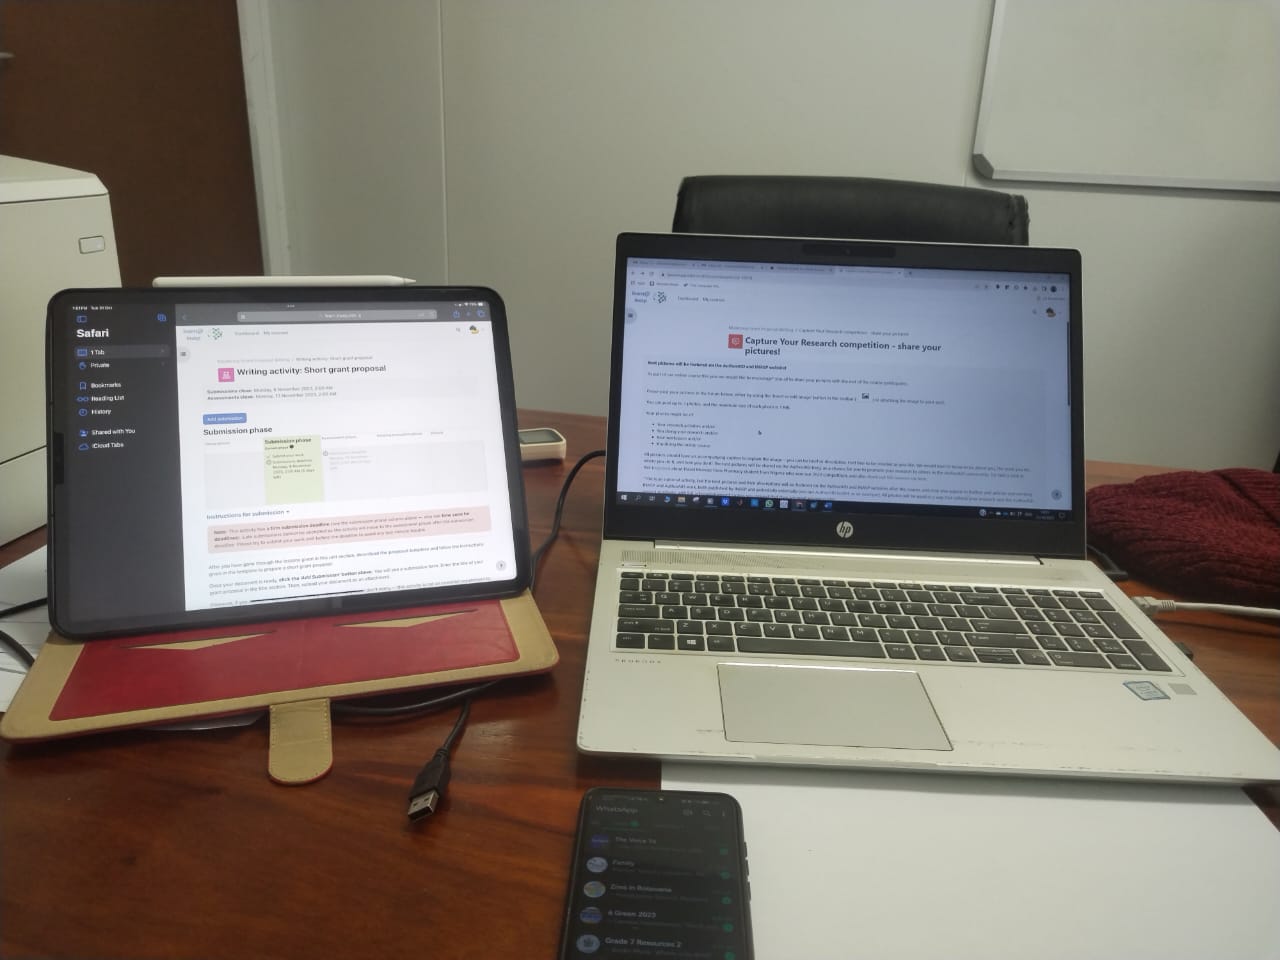 An open laptop showing the Capture Your Research Contest page of an AuthorAID MOOC open, next to a tablet that is open on an activity page of an AuthorAID MOOC. The devices are on a desk, along with a smartphone. 